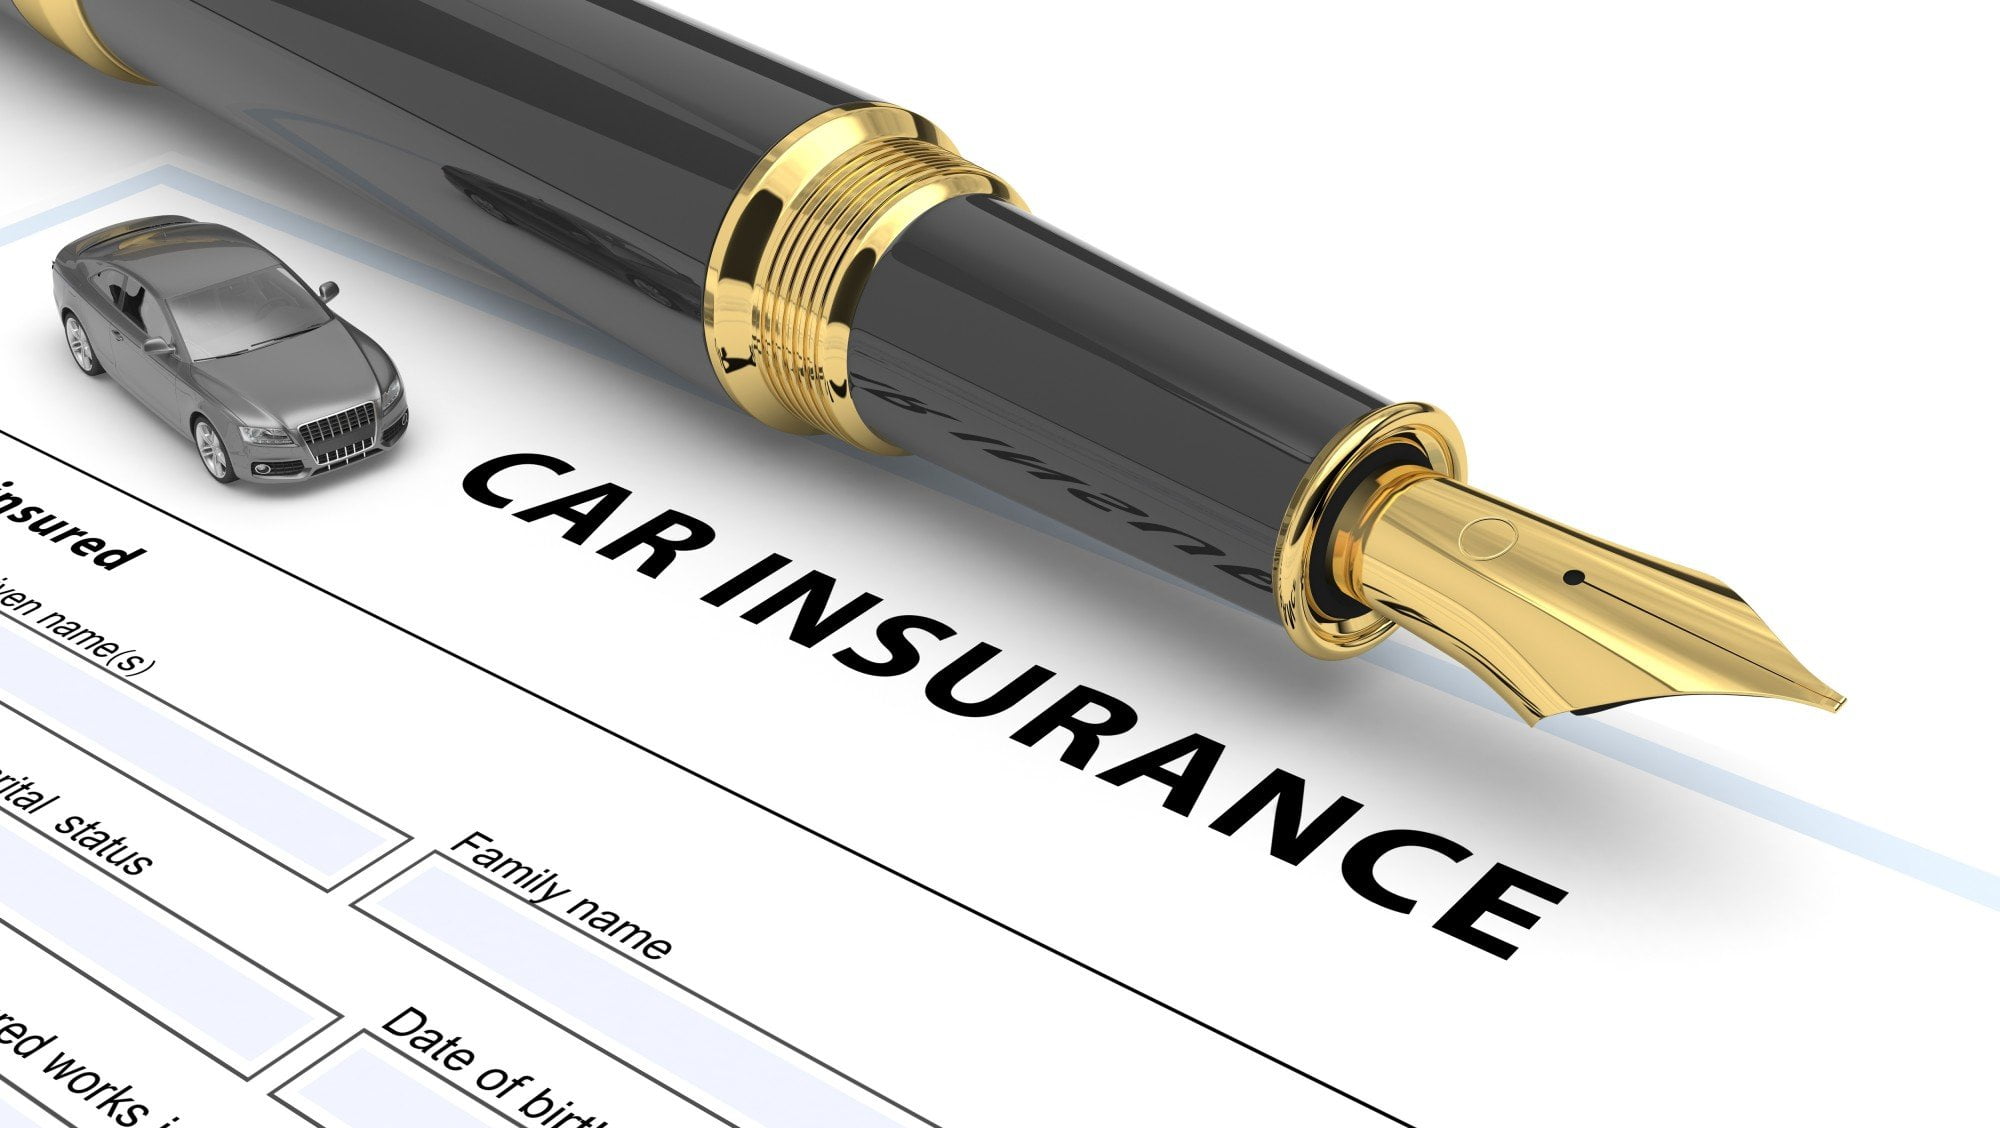 Do you know which type of car insurance you need? Read here for a guide to uninsured motorist coverage vs collision coverage to find out which is right for you.